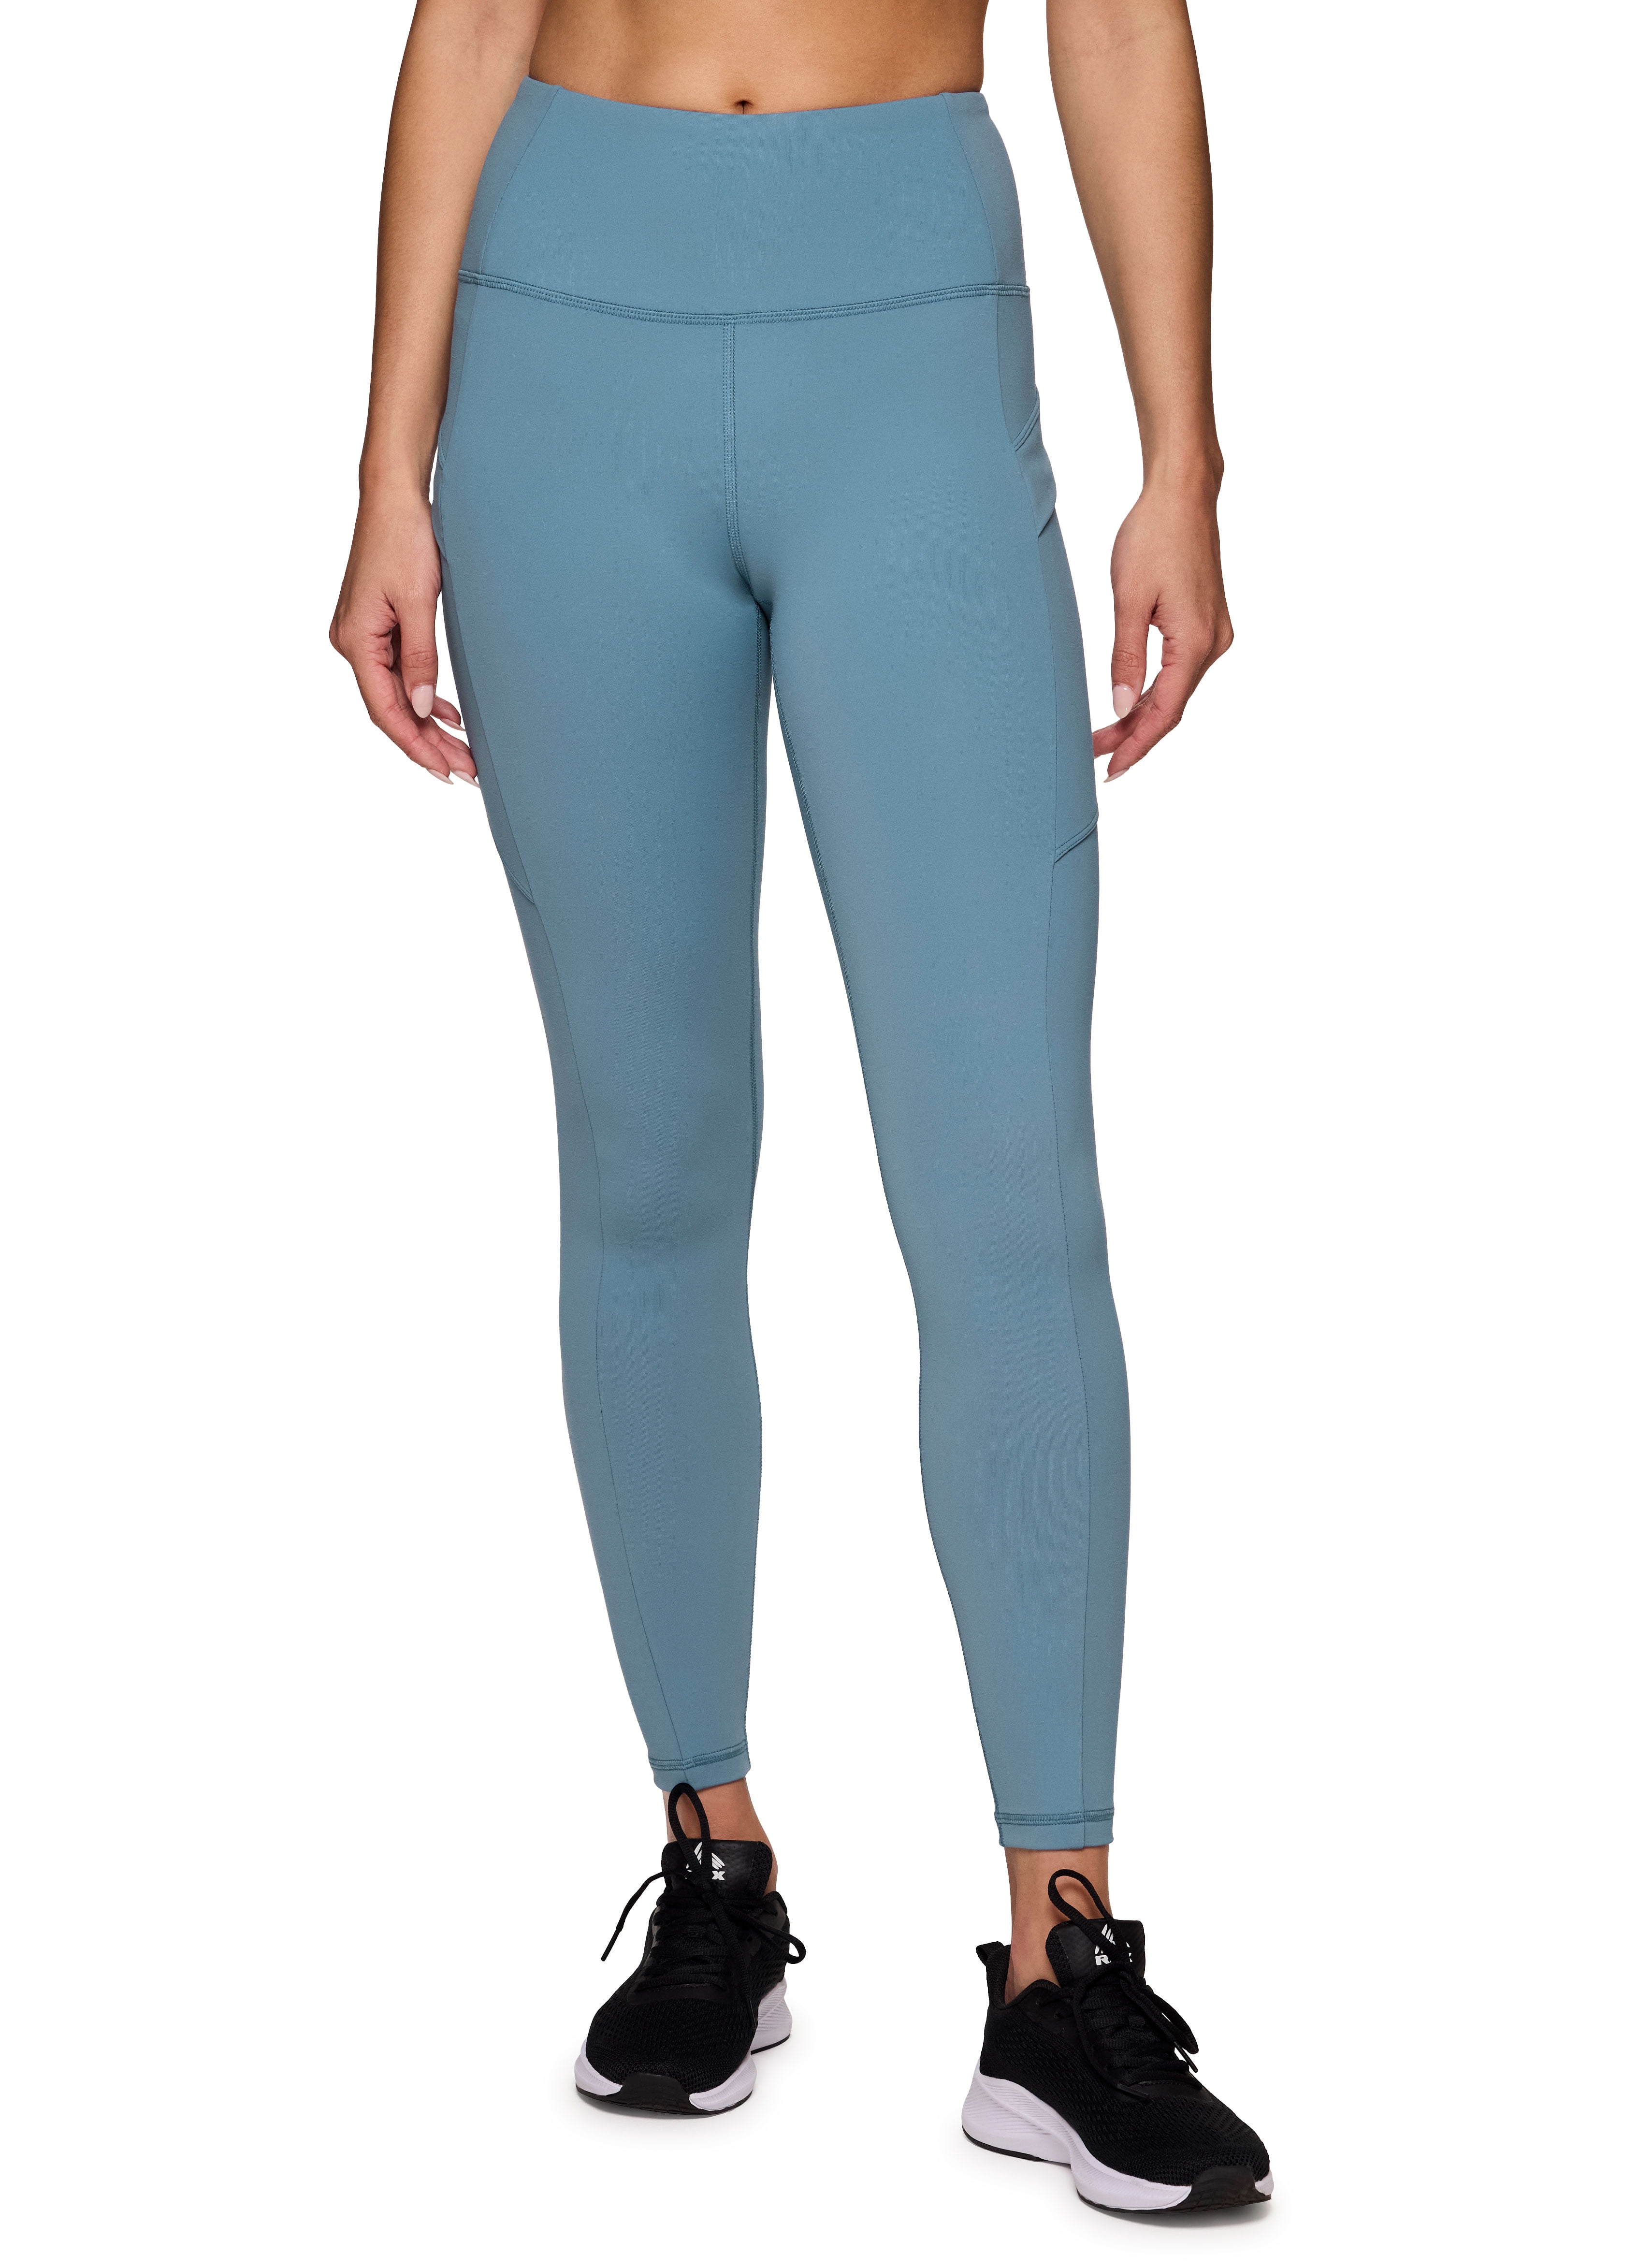 Avalanche Women's Soft High Waist Full Length Hiking Legging With Pockets